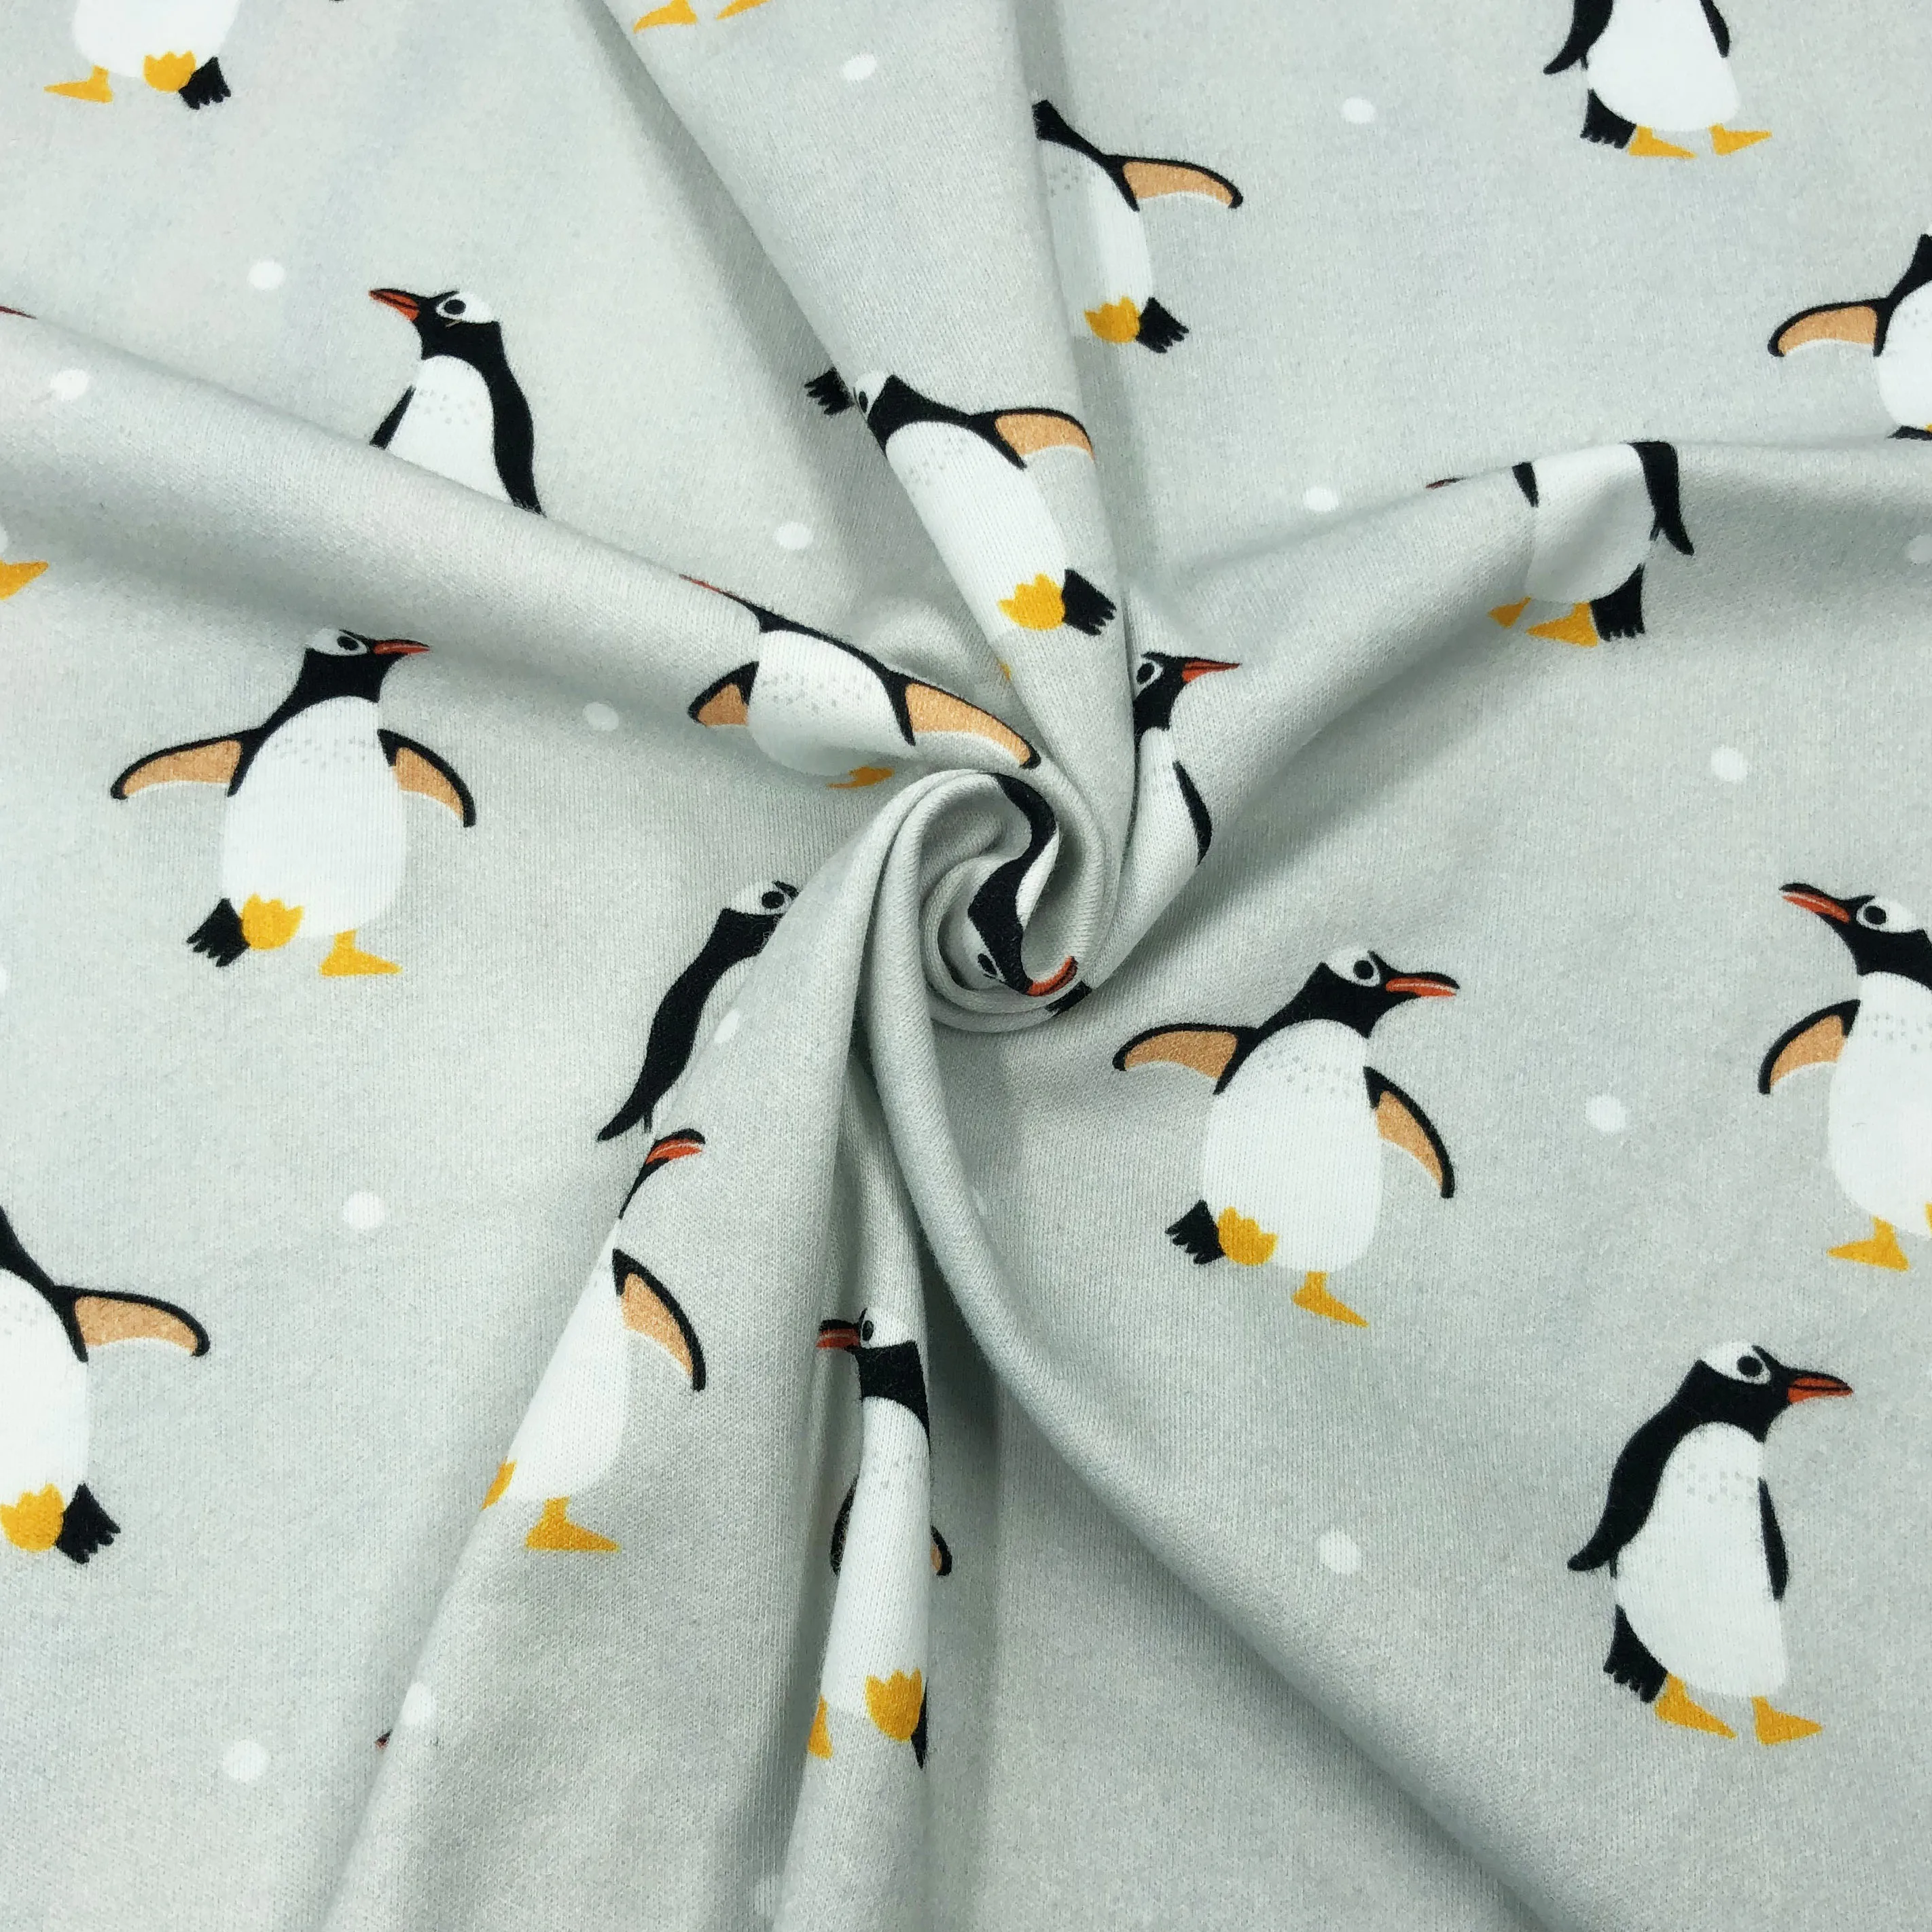 Textile cutting machine tissu pour coudre cotton stretch fabric penguin style on knit fabric for children underwear